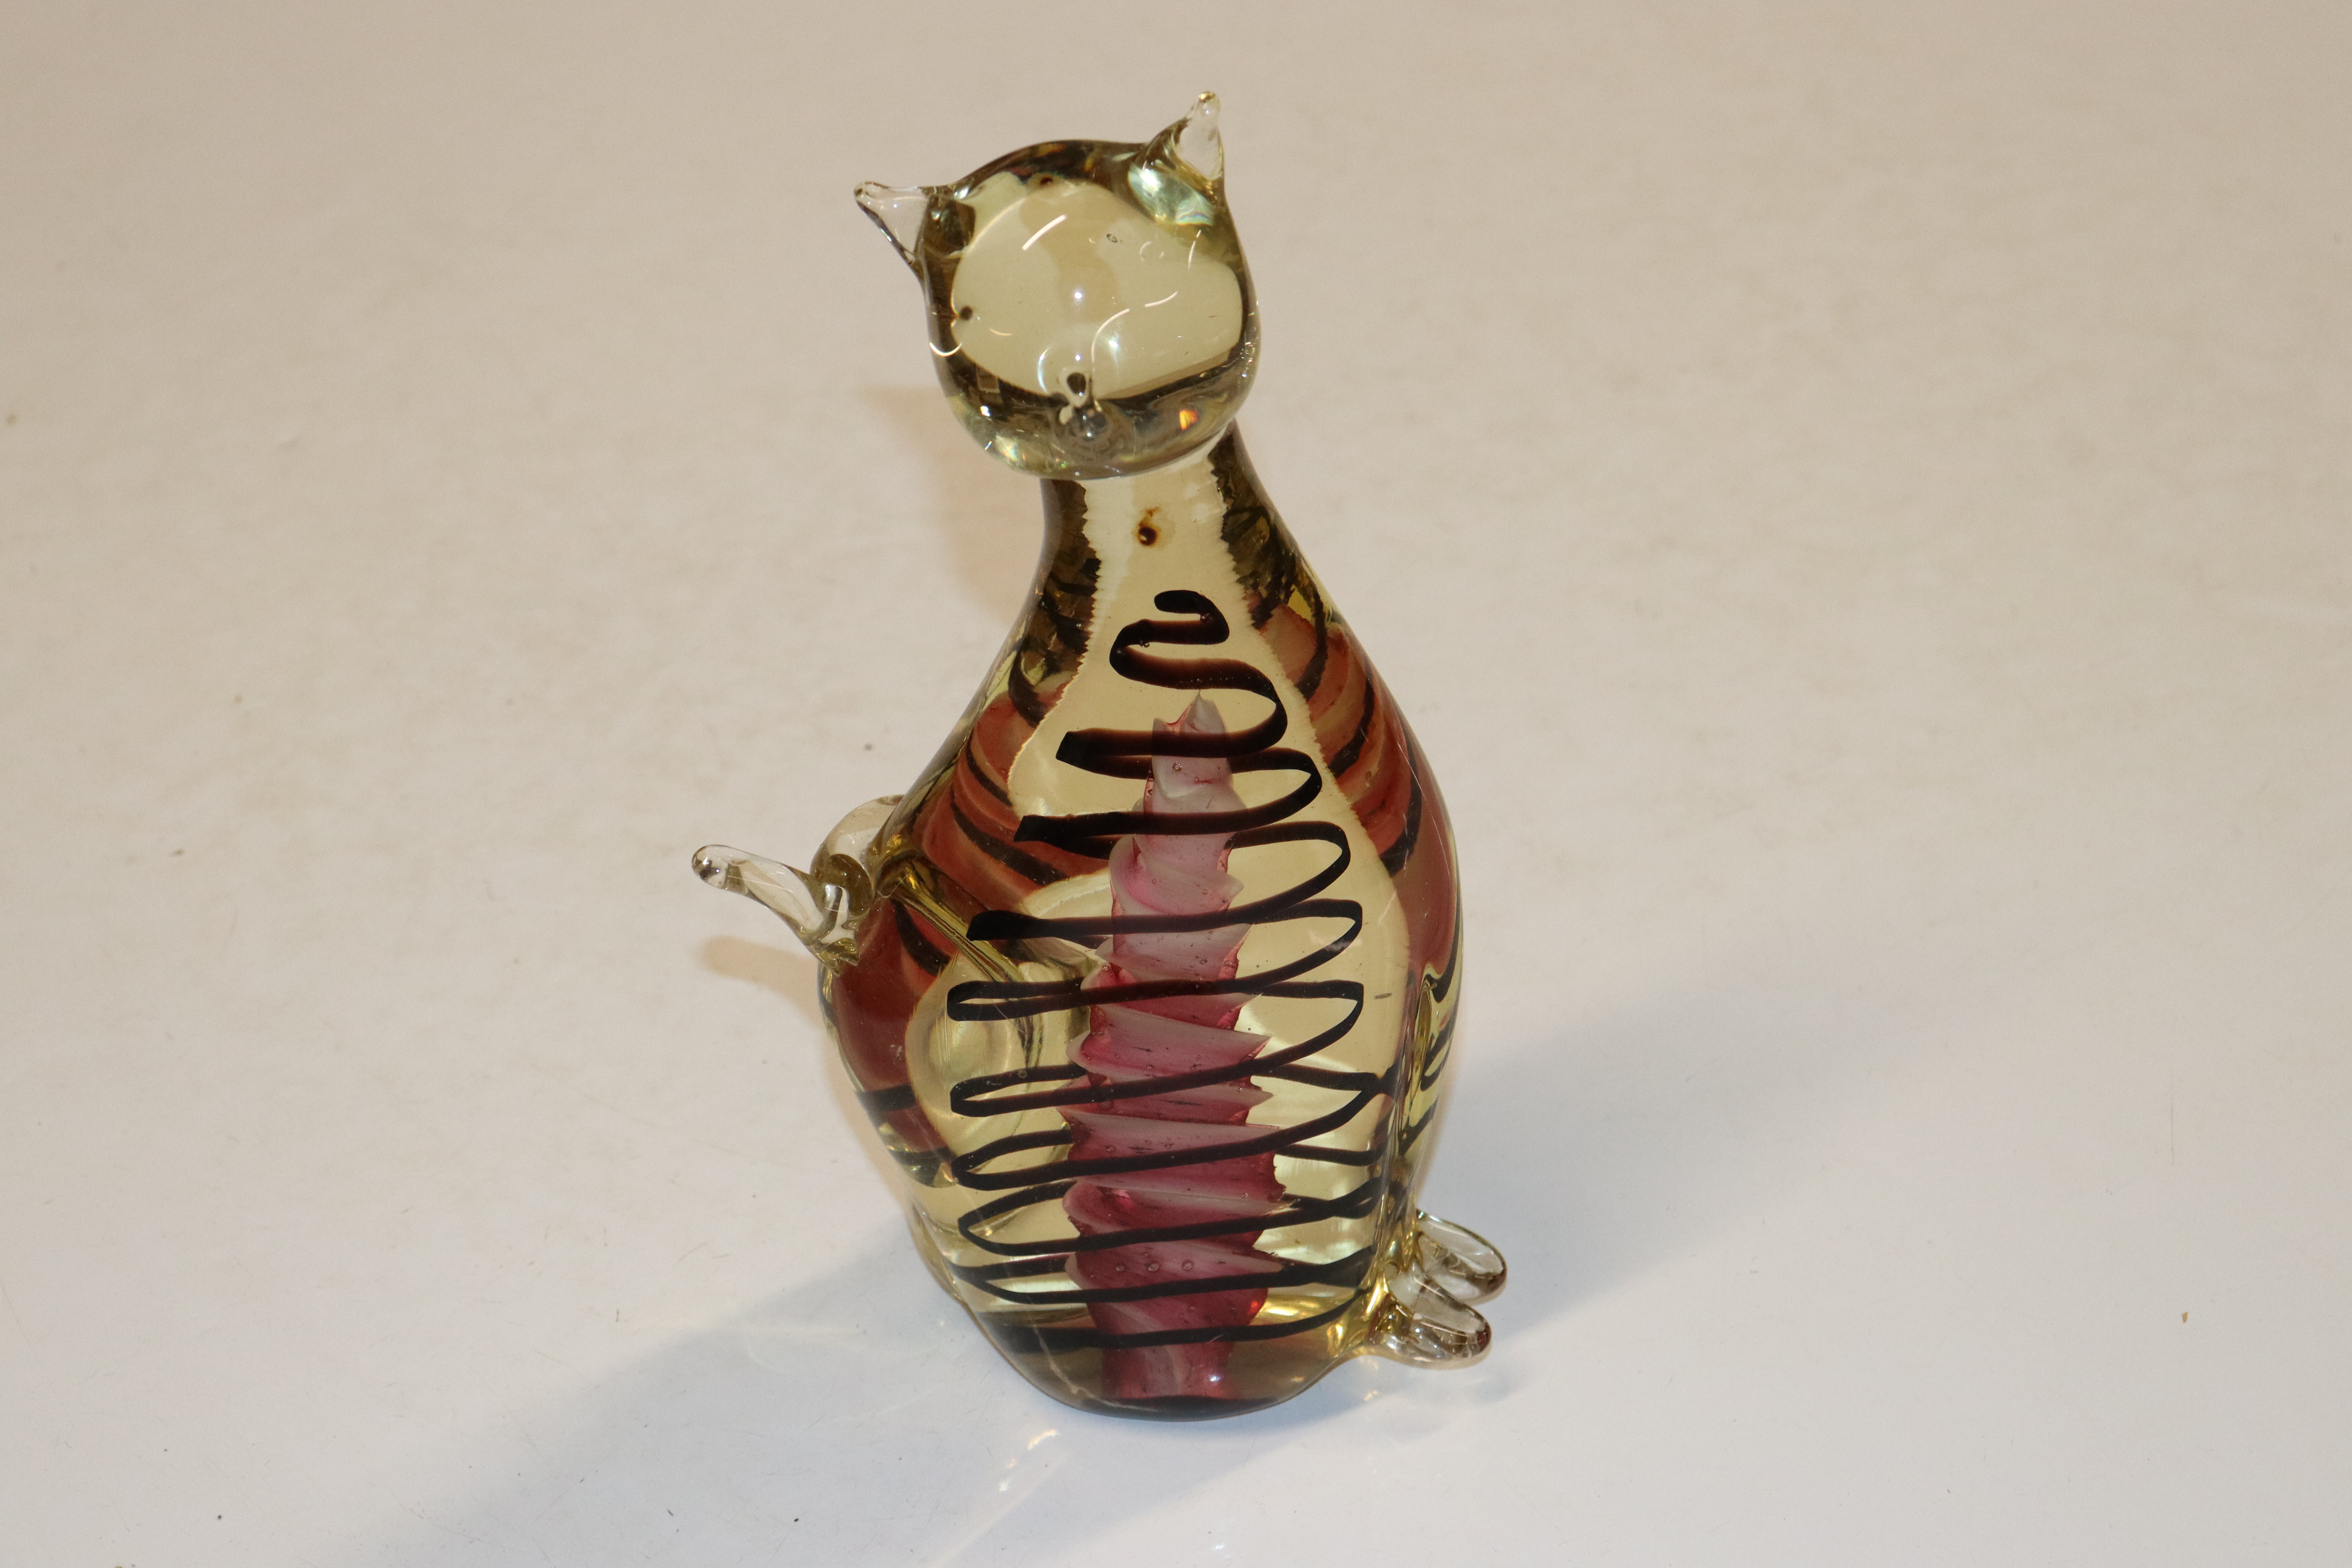 An Art Glass Murano style ornament in the form of